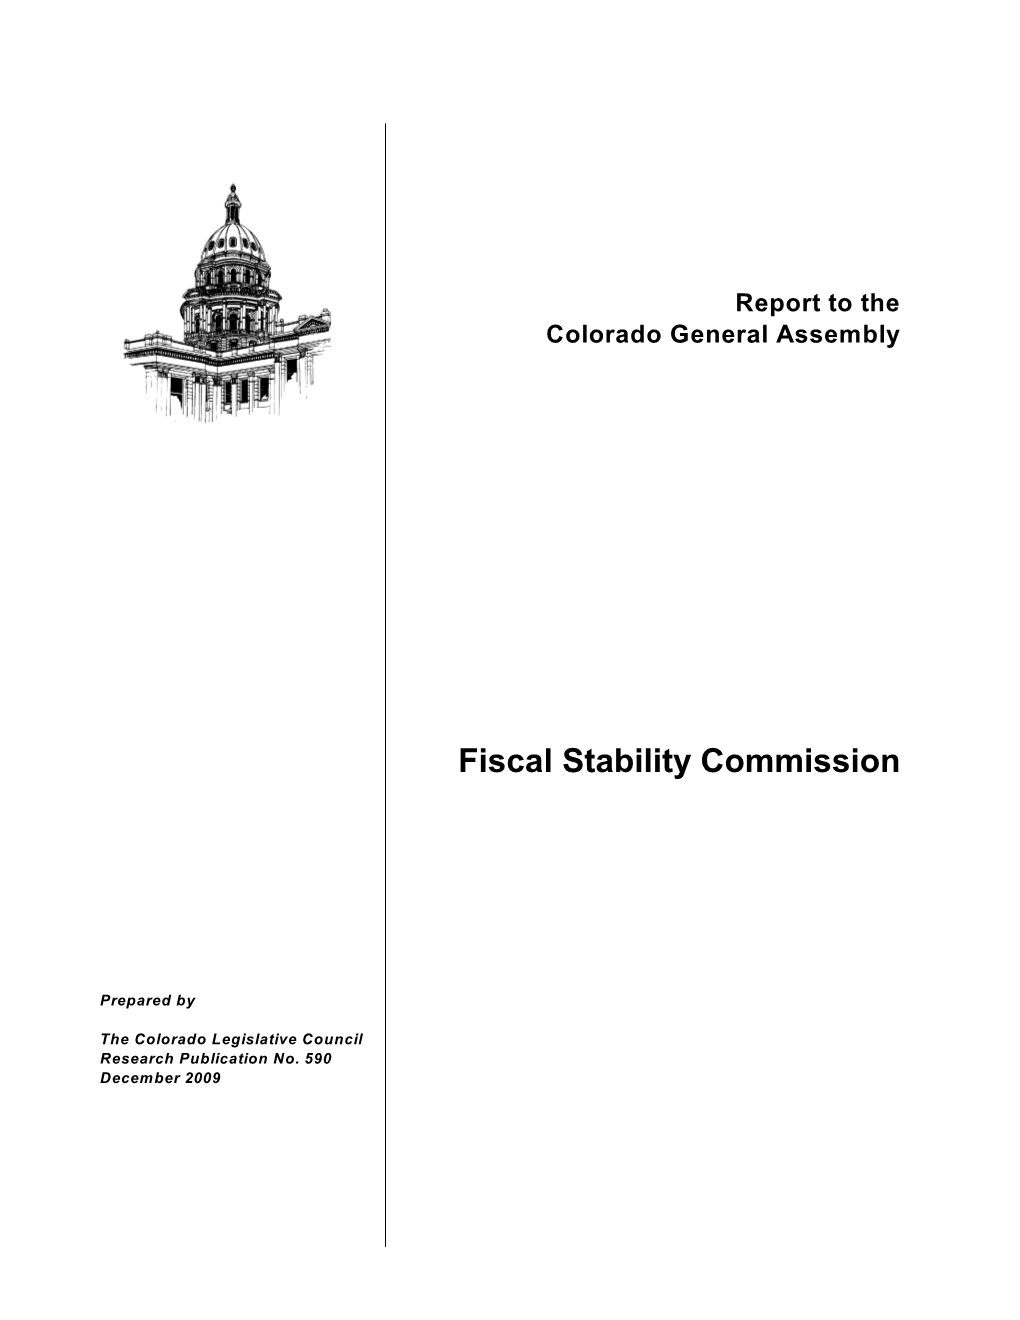 Fiscal Stability Commission